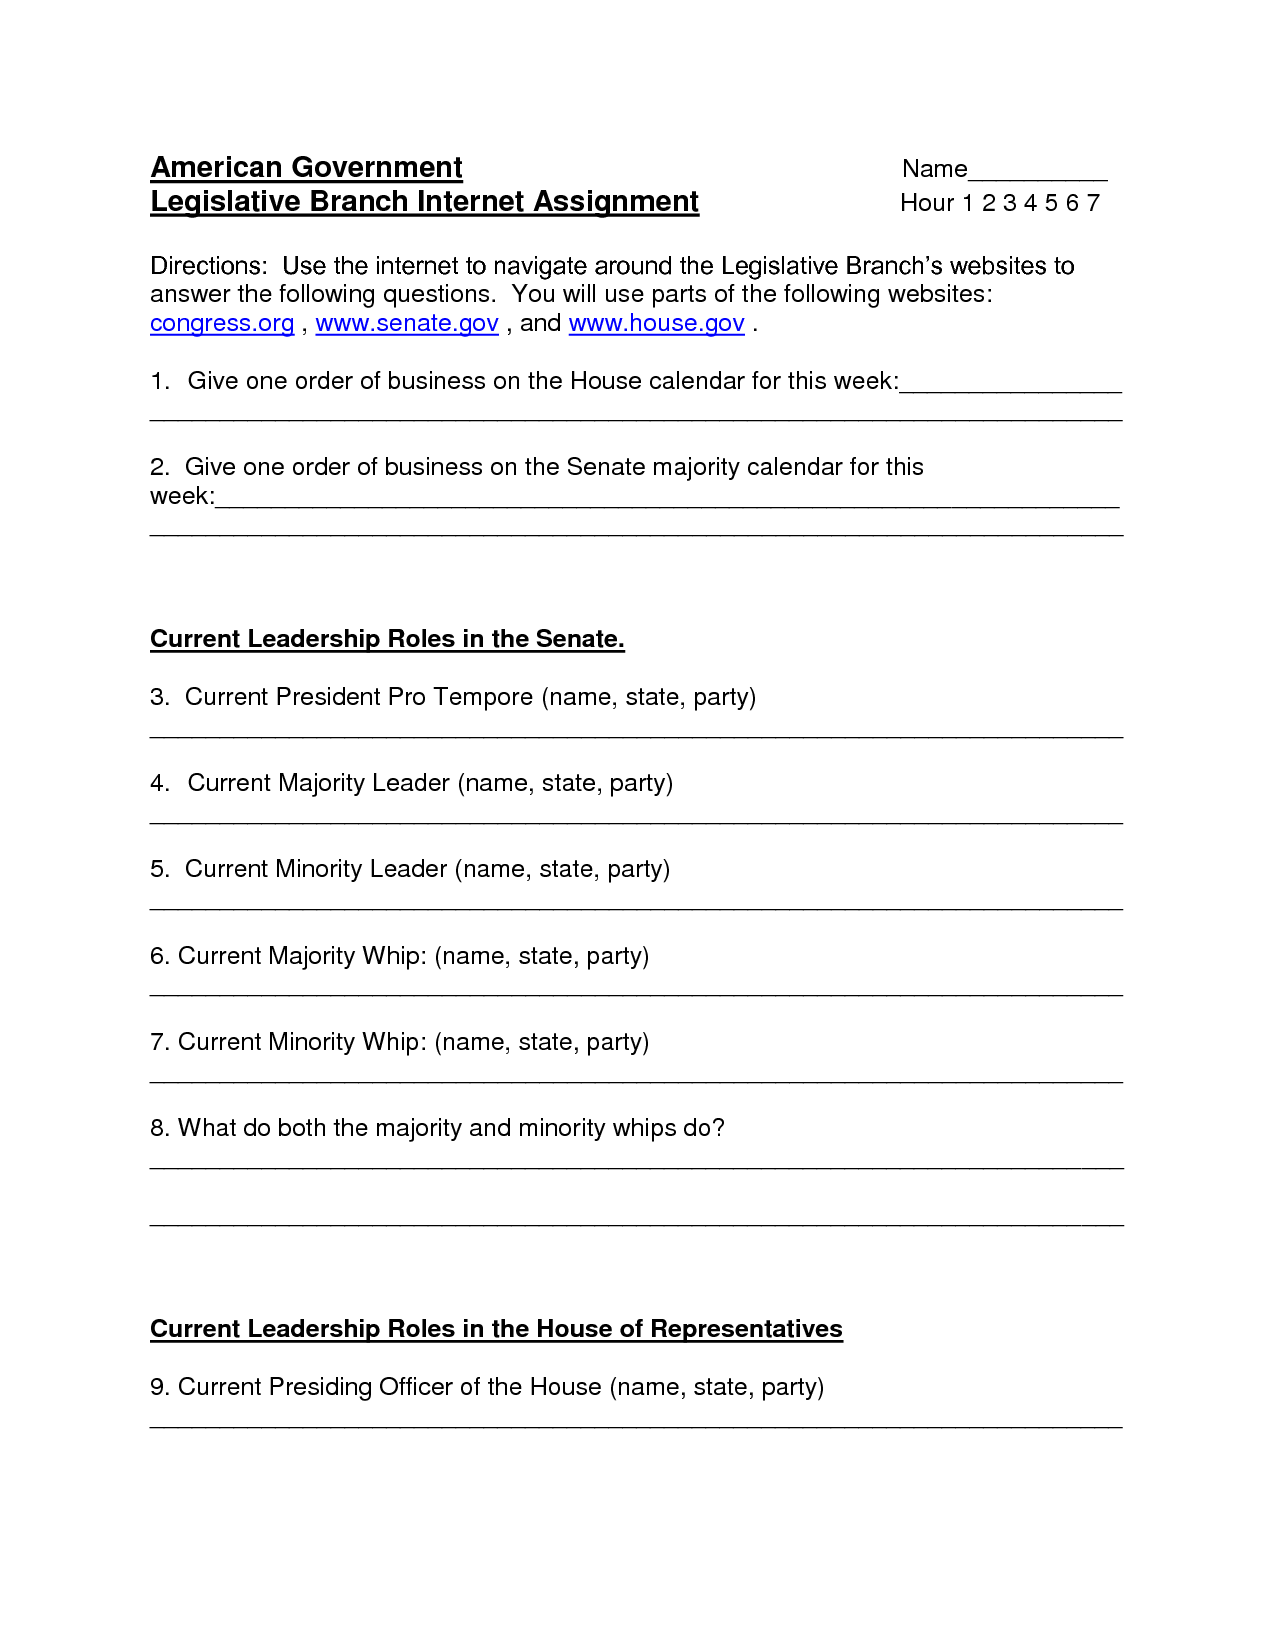 16-best-images-of-3-parts-of-government-worksheet-three-government-branches-worksheet-checks